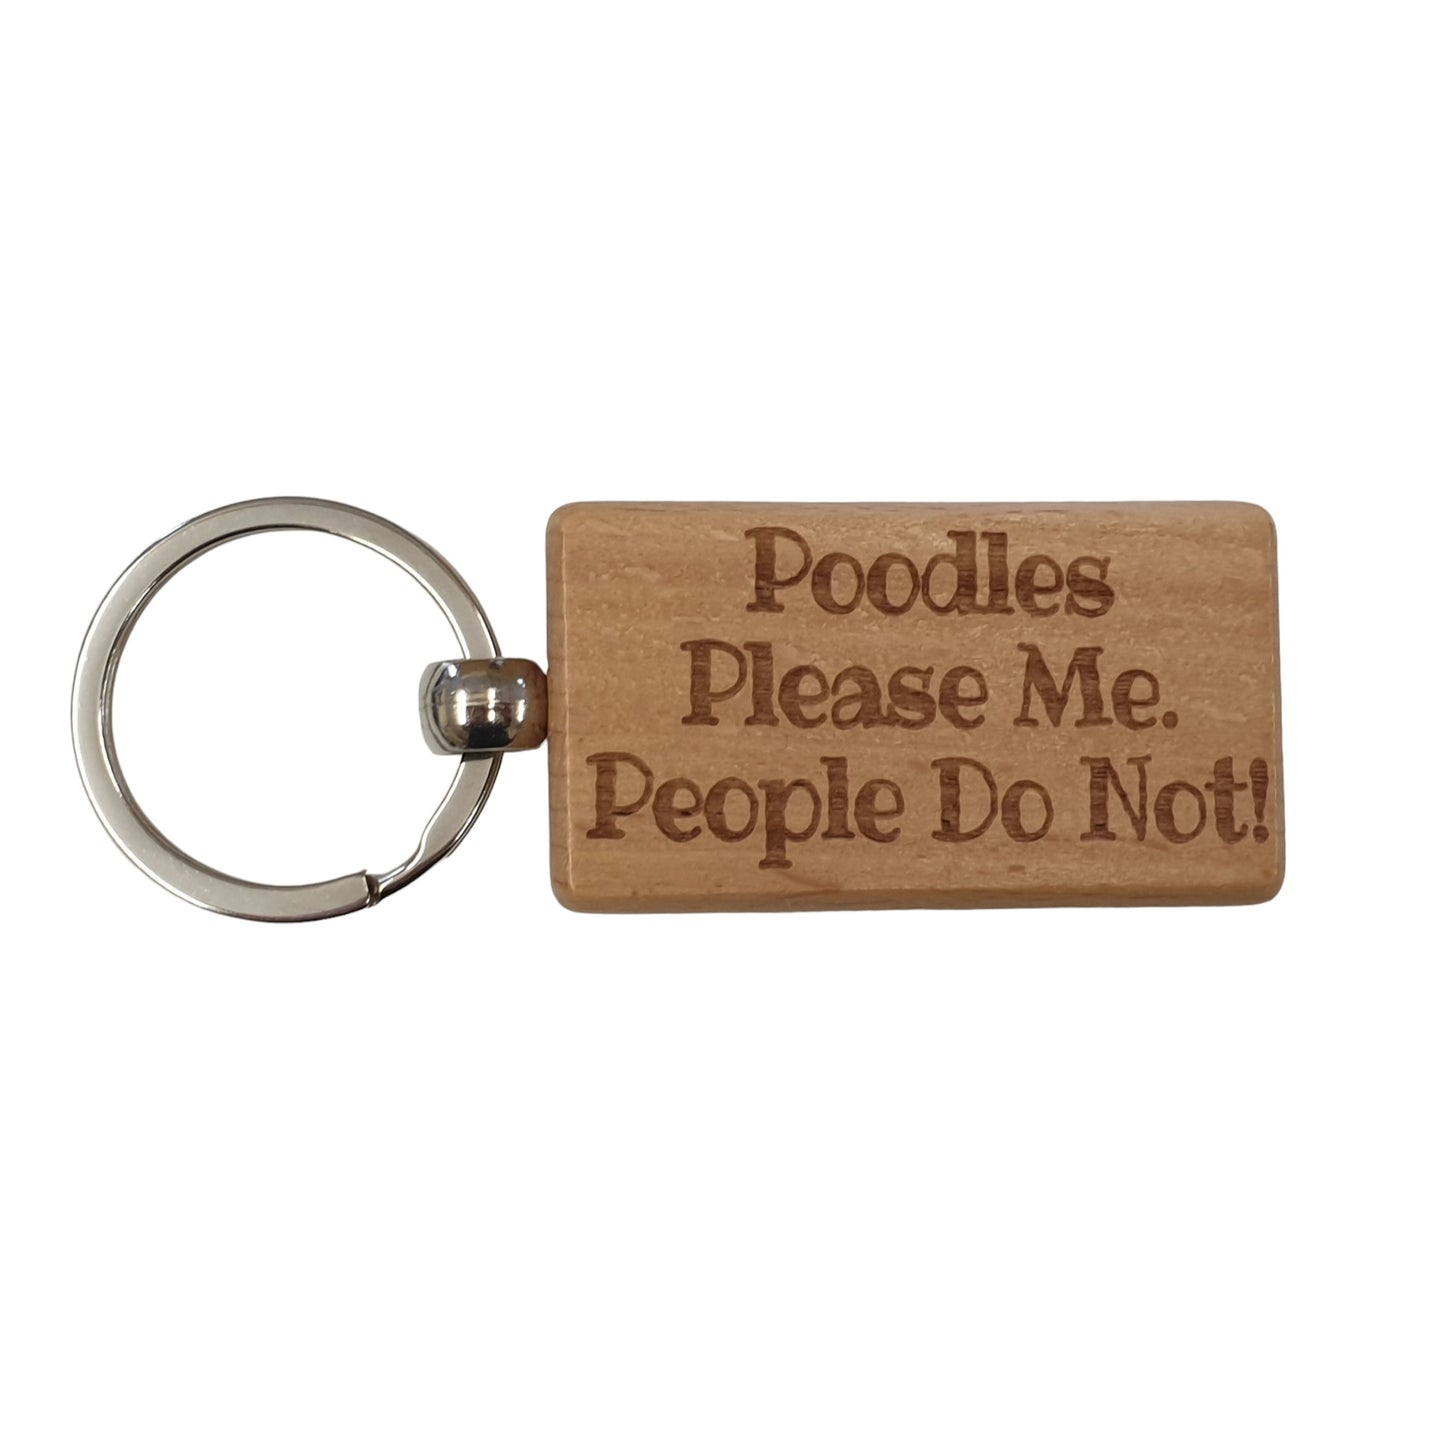 Poodle Keyring Gift - * Please Me People Do Not - Nice Cute Engraved Wooden Key Fob Novelty Dog Owner Present